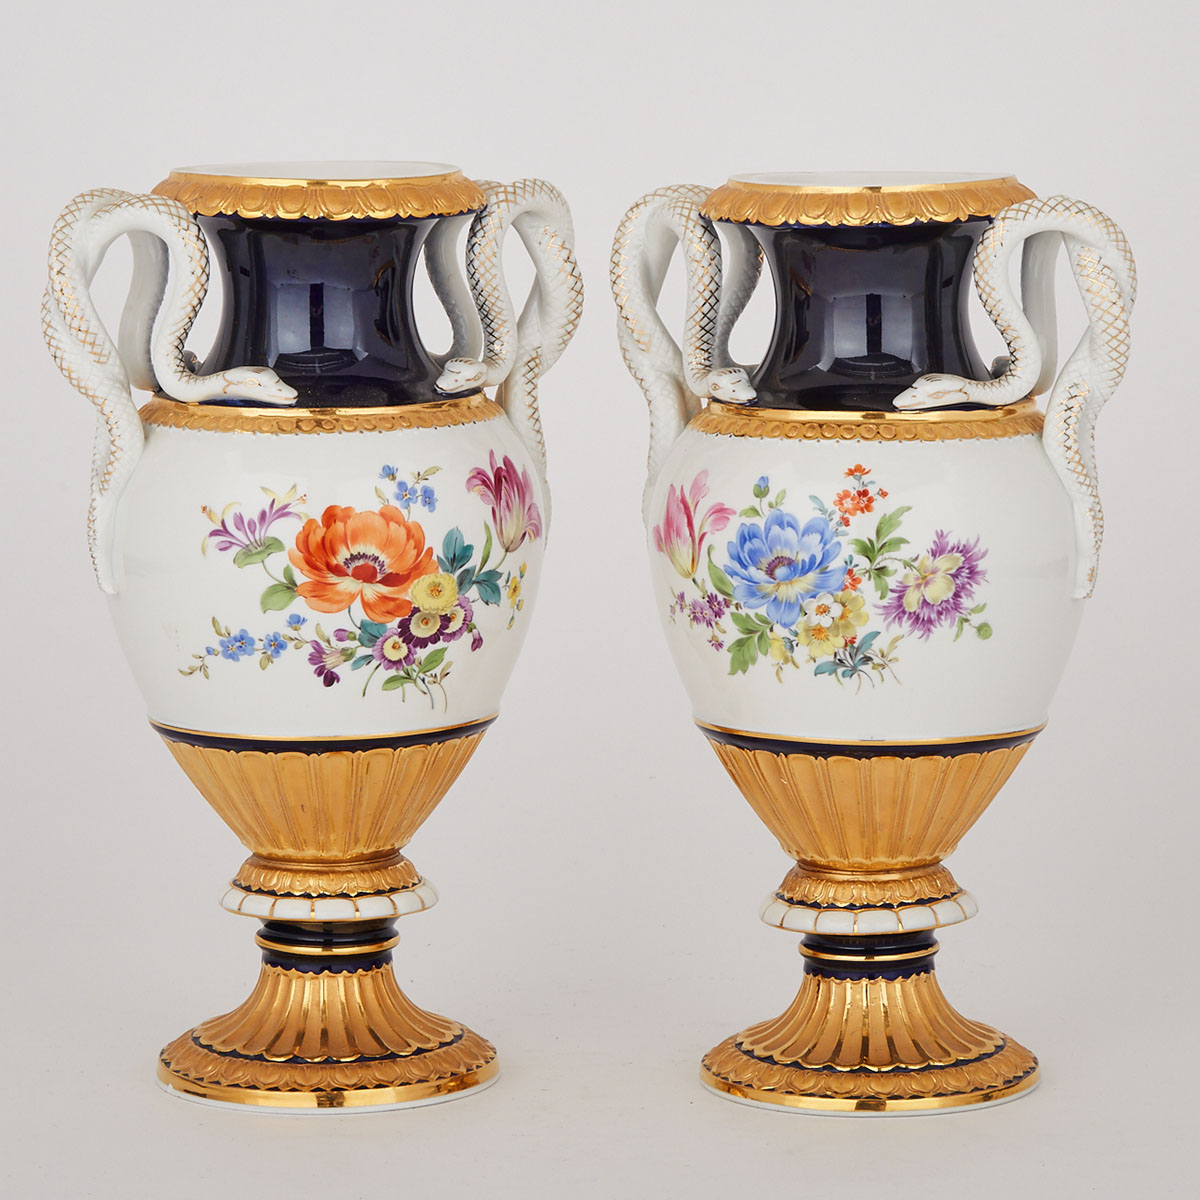 Pair of Meissen Floral Decorated Two-Handled Vases, 20th century